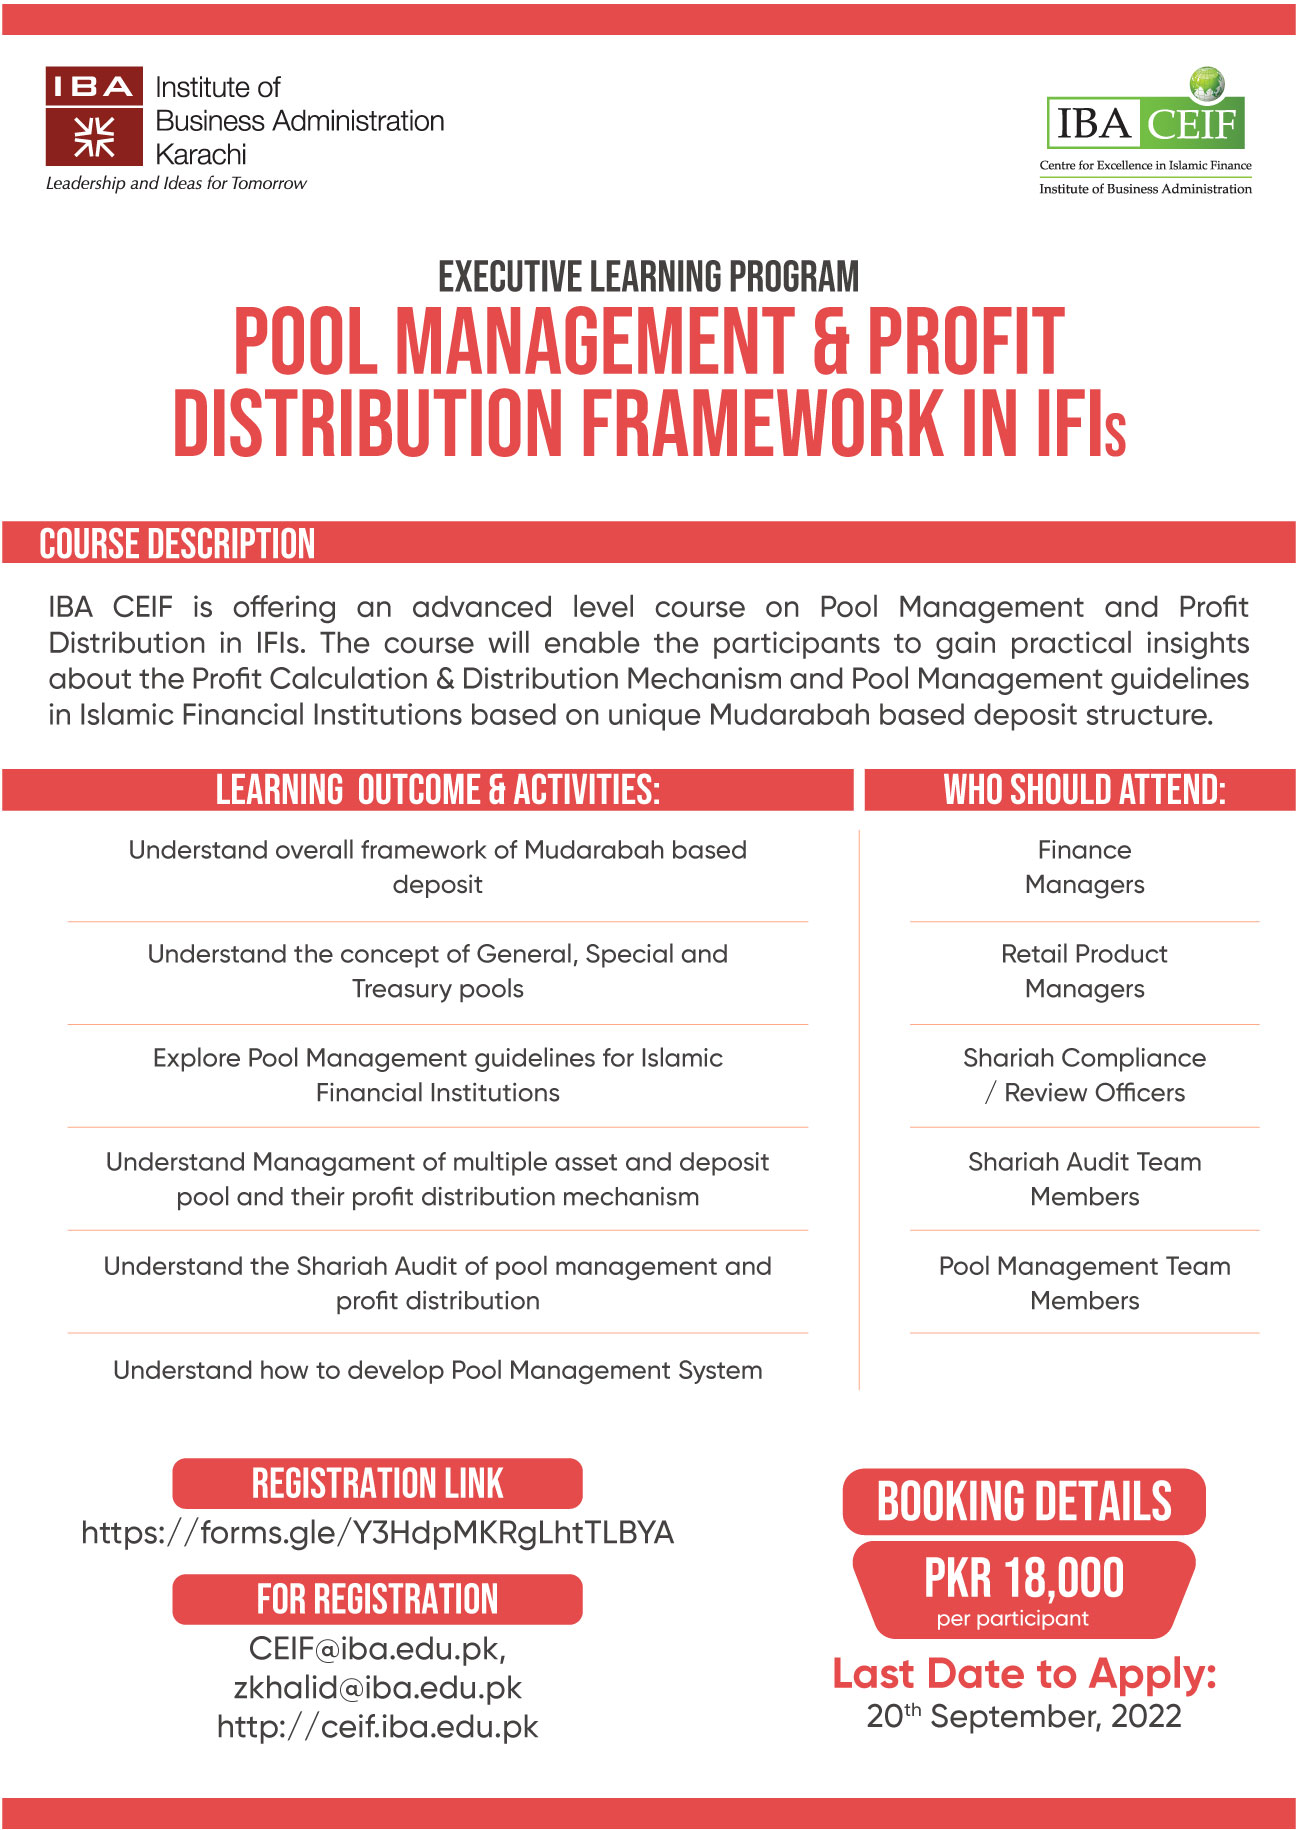  Pool Management and Profit distribution in Islamic Financial Institutions (IFIs)